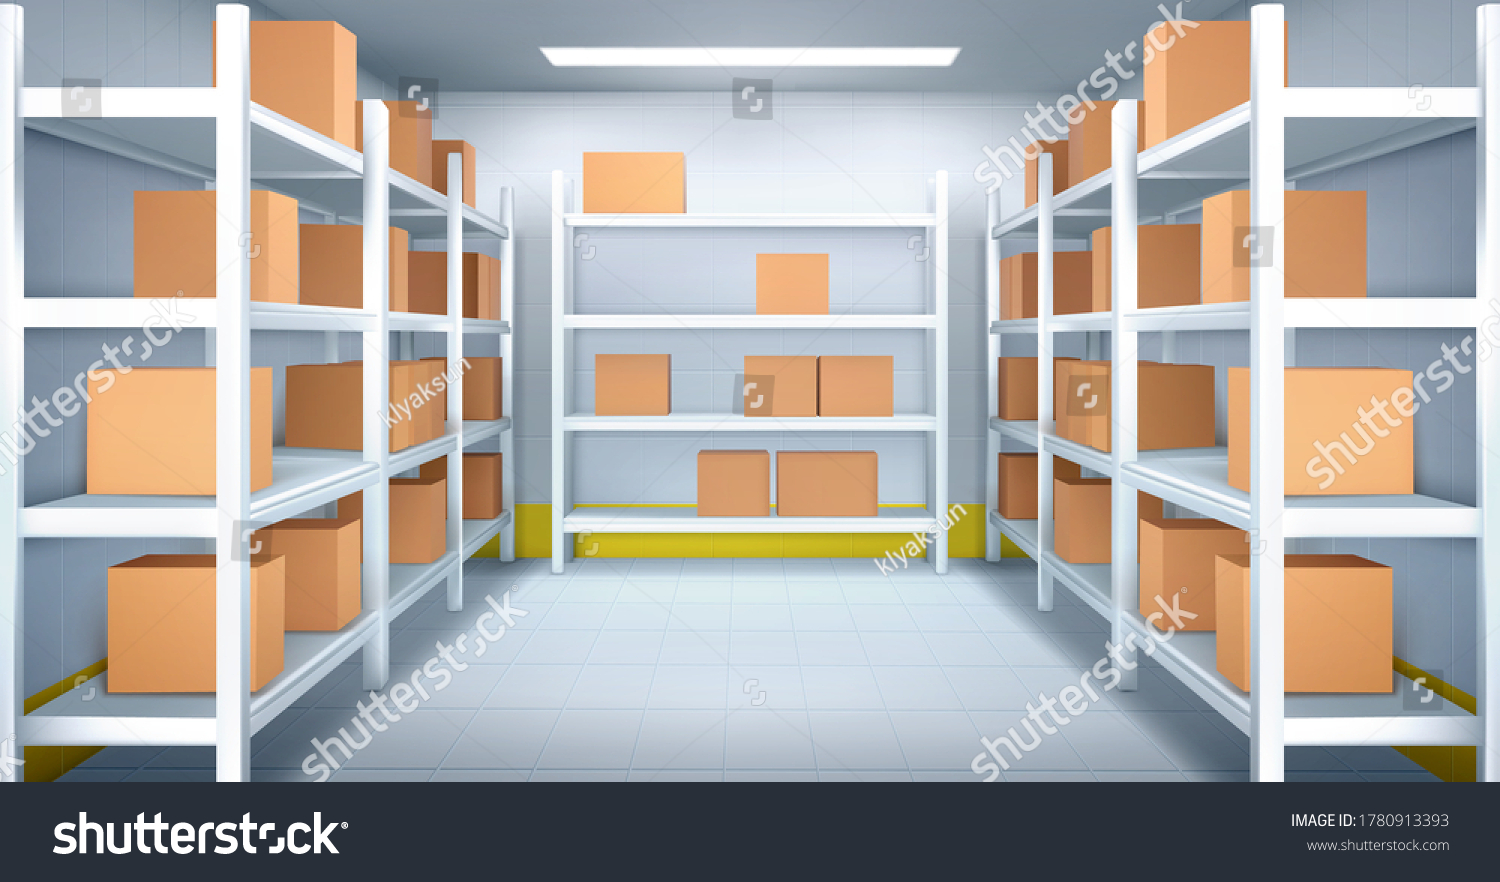 SVG of Cold room in warehouse with cardboard boxes on racks. Vector realistic interior of industrial storage with shelves, tiled walls and floor. Refrigerator chamber in factory, store or restaurant svg